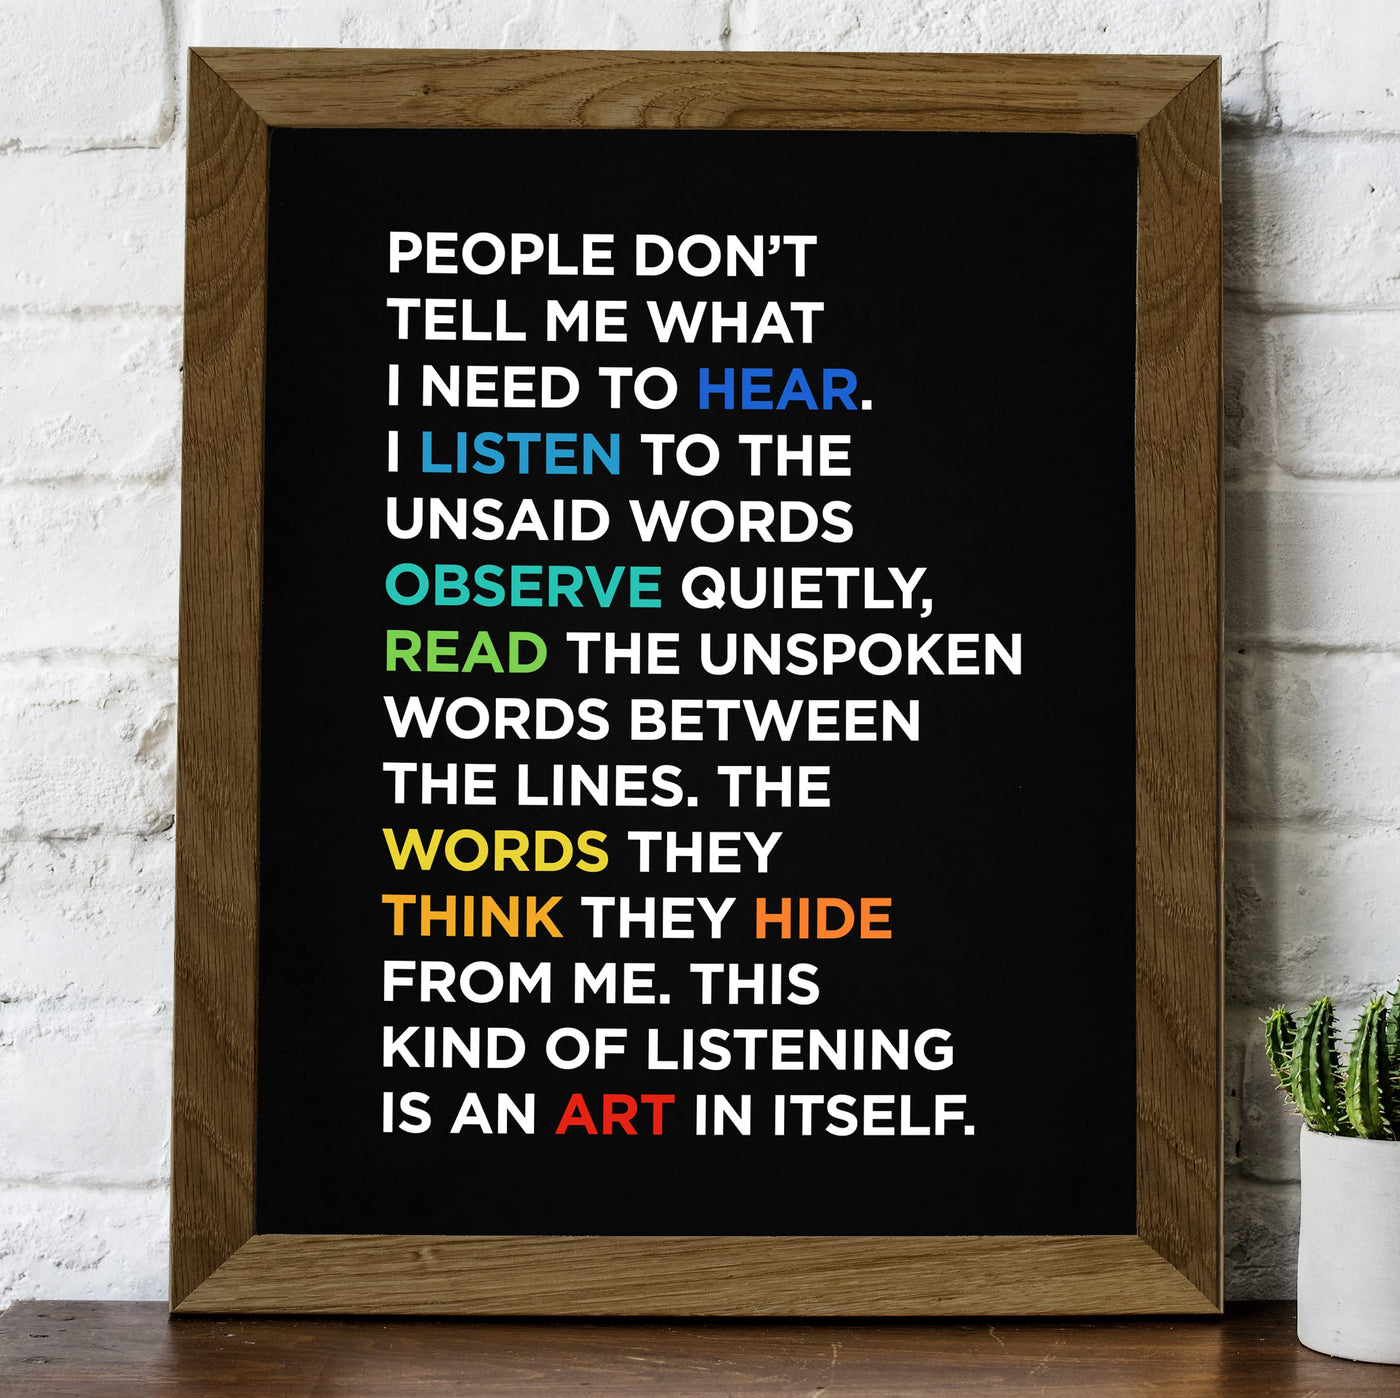 Listen to the Unsaid Words Inspirational Quotes Wall Decor -8 x 10" Motivational Print Wall Art -Ready to Frame. Positive Wall Decoration for Home-Office-Classroom-Work-Success Decor! Great Advice!